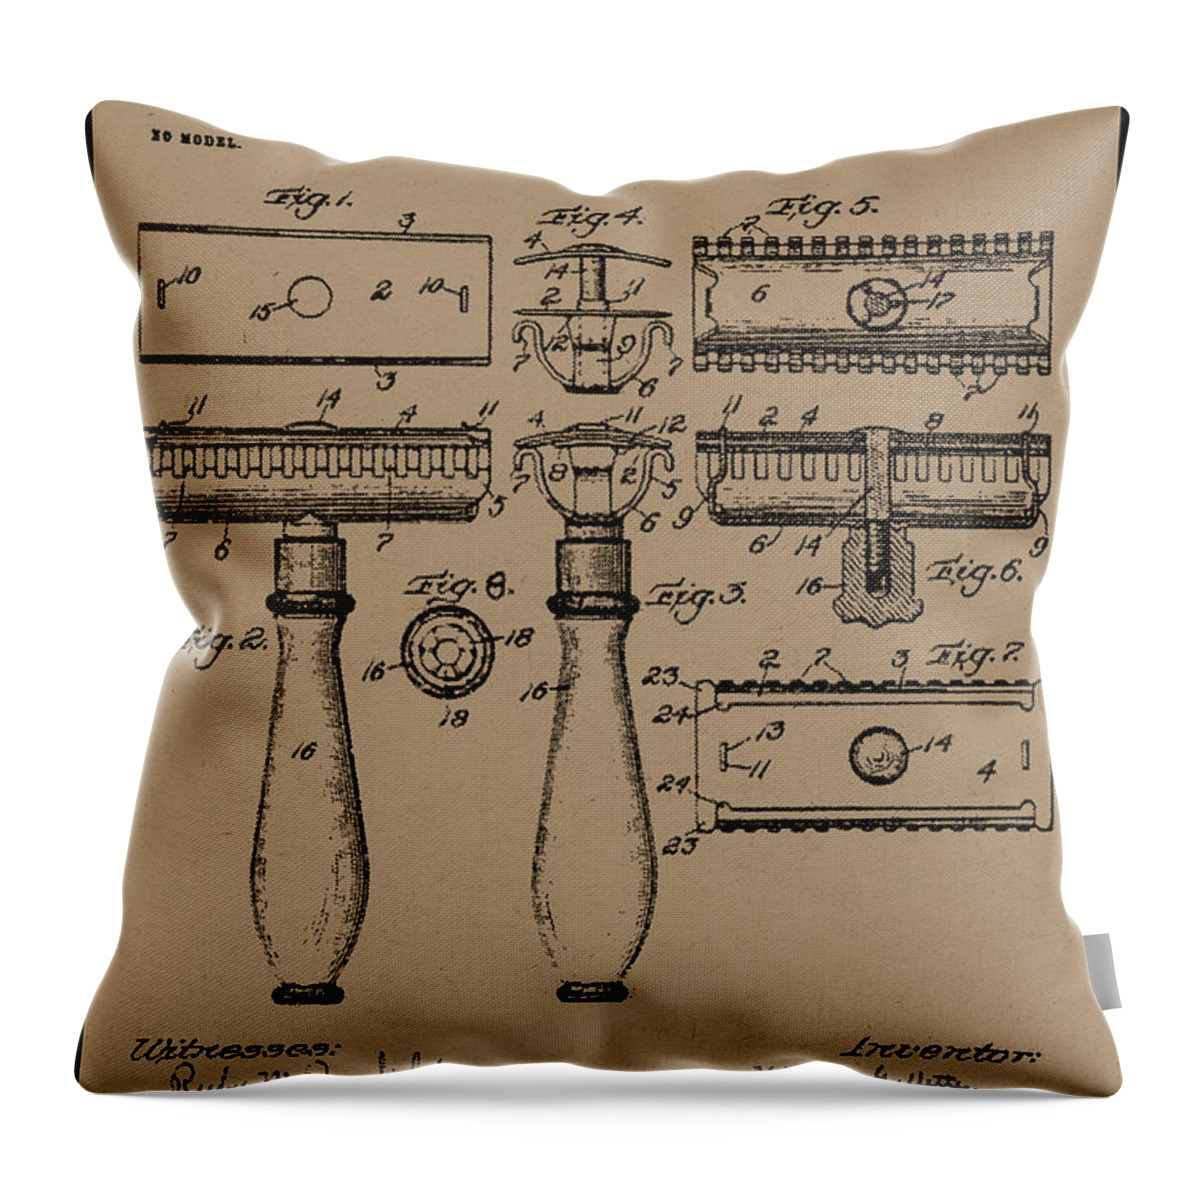 1904 Gillette Razor Patent Drawing Throw Pillow featuring the painting 1904 Gillette Razor Patent Drawing by King G Gillette